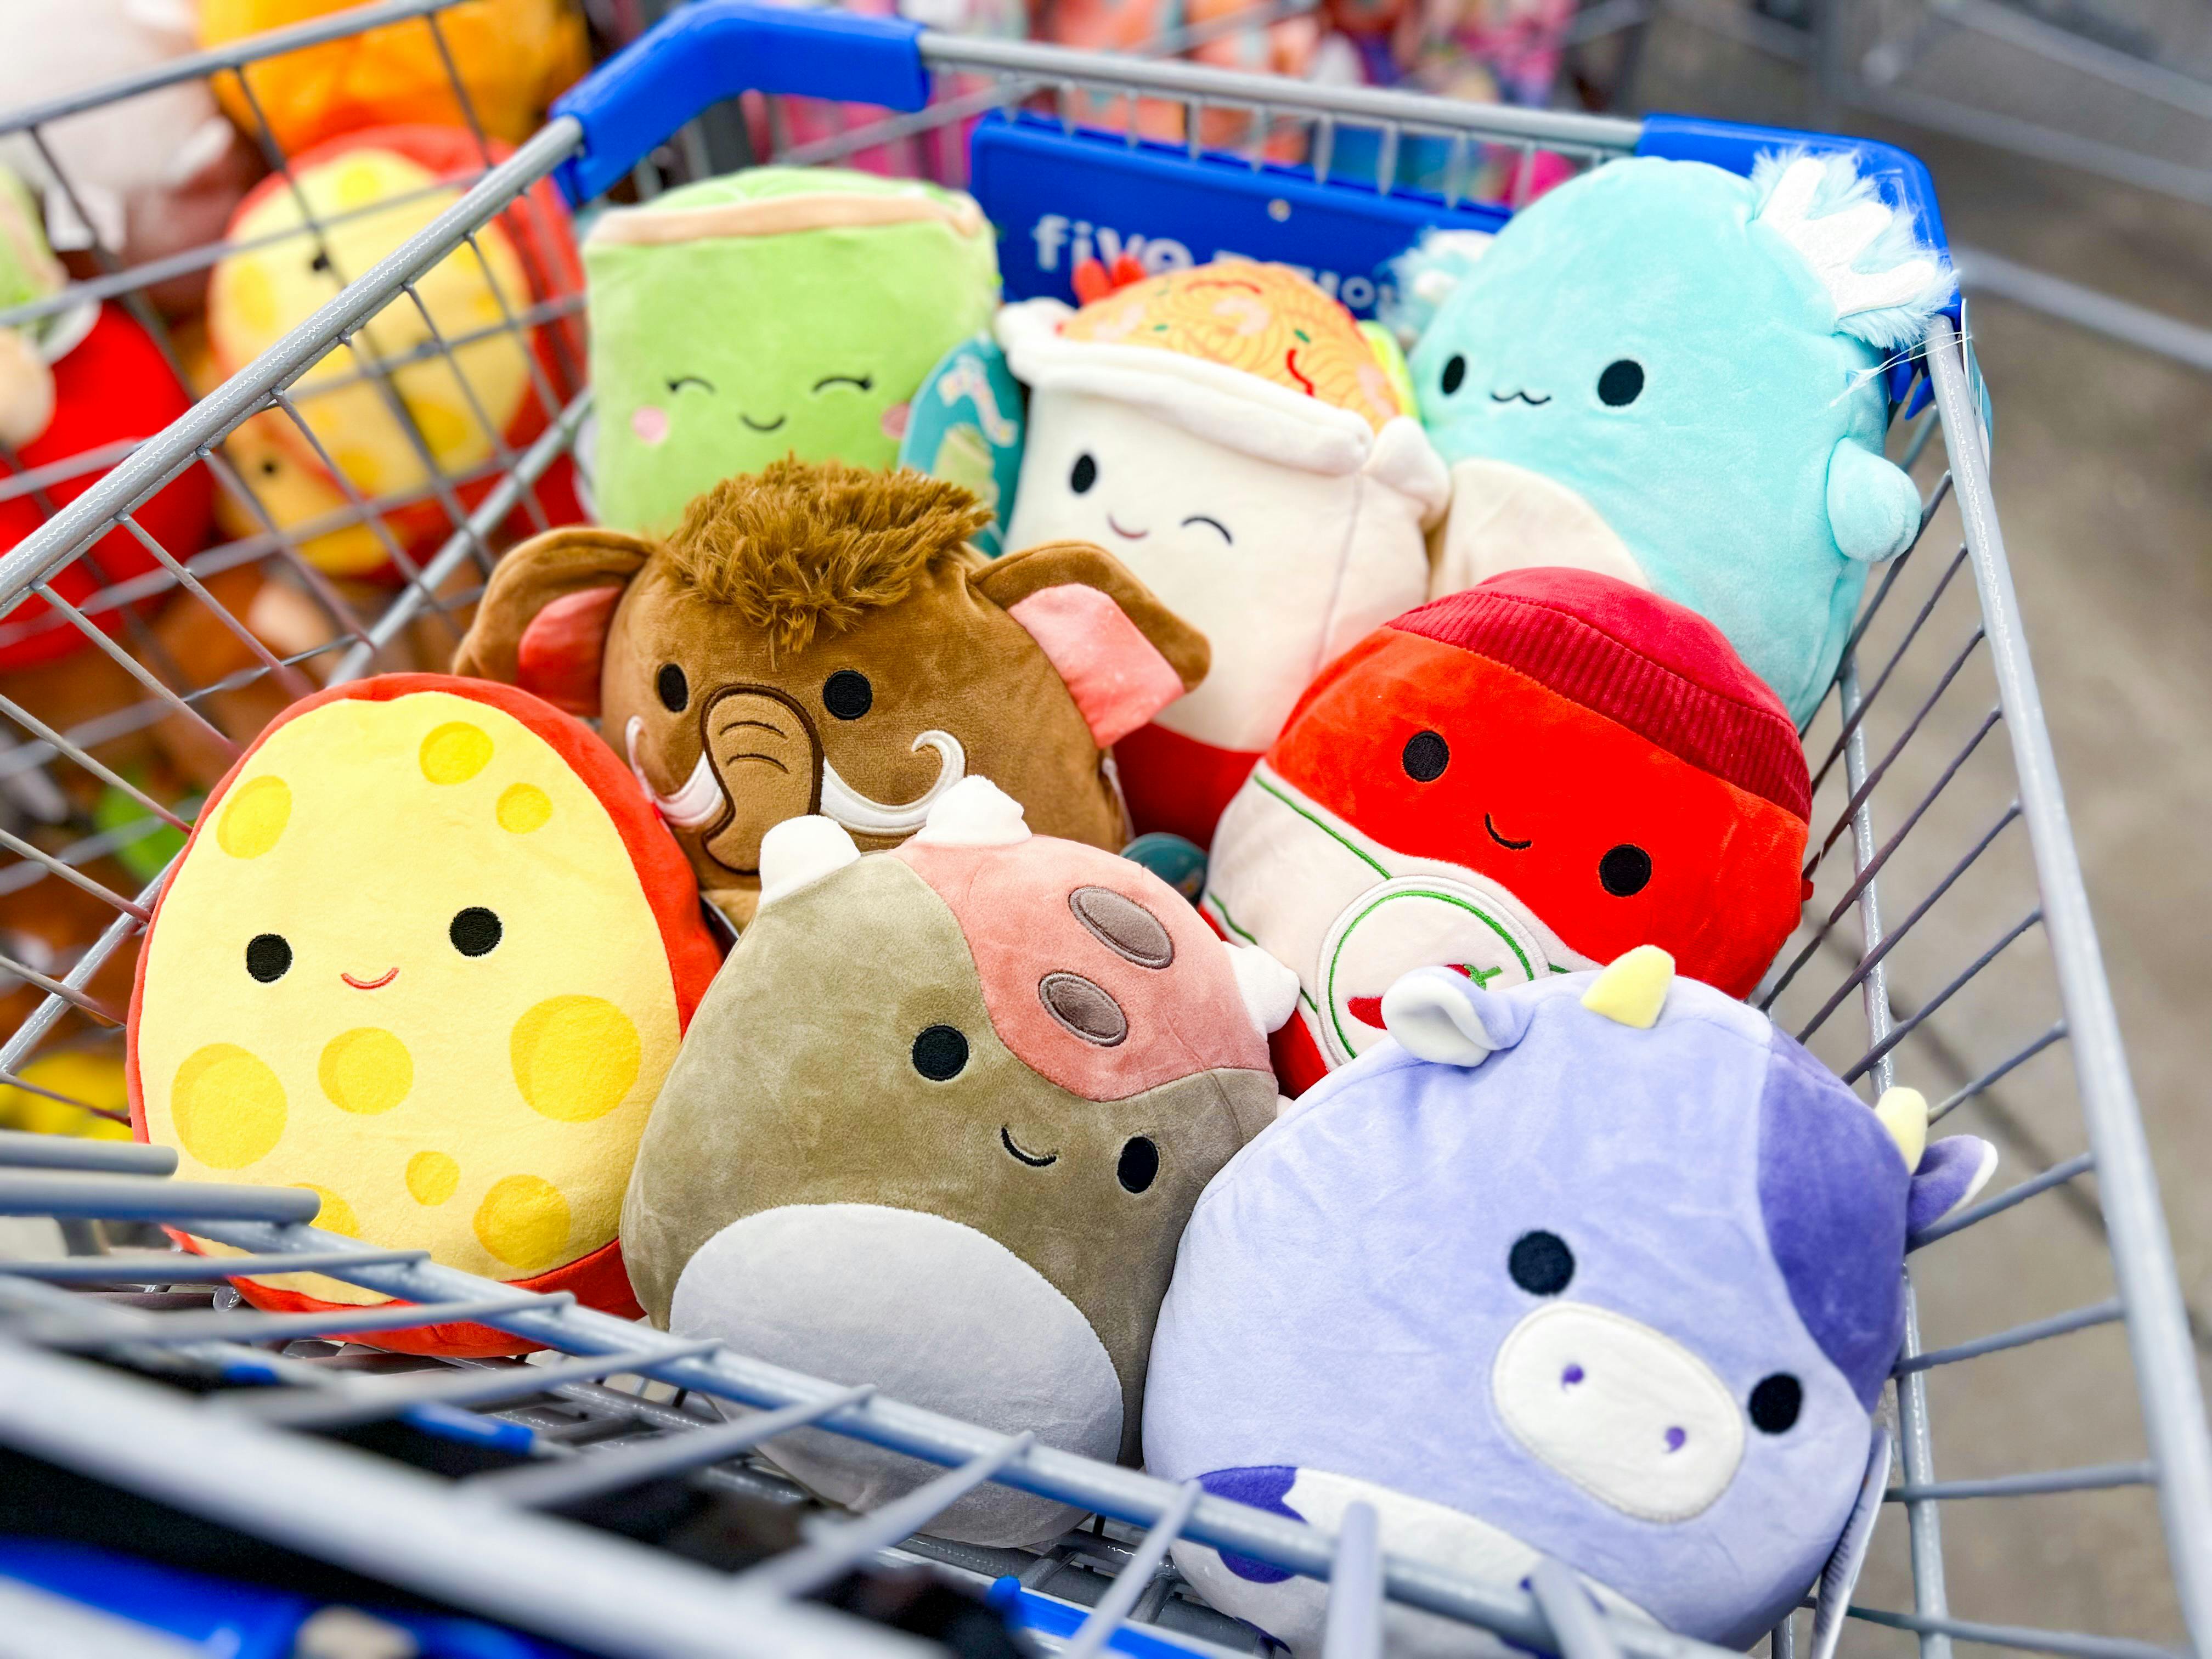 This Squishmallow Collector App Lets You Buy the Latest Drops at Retail